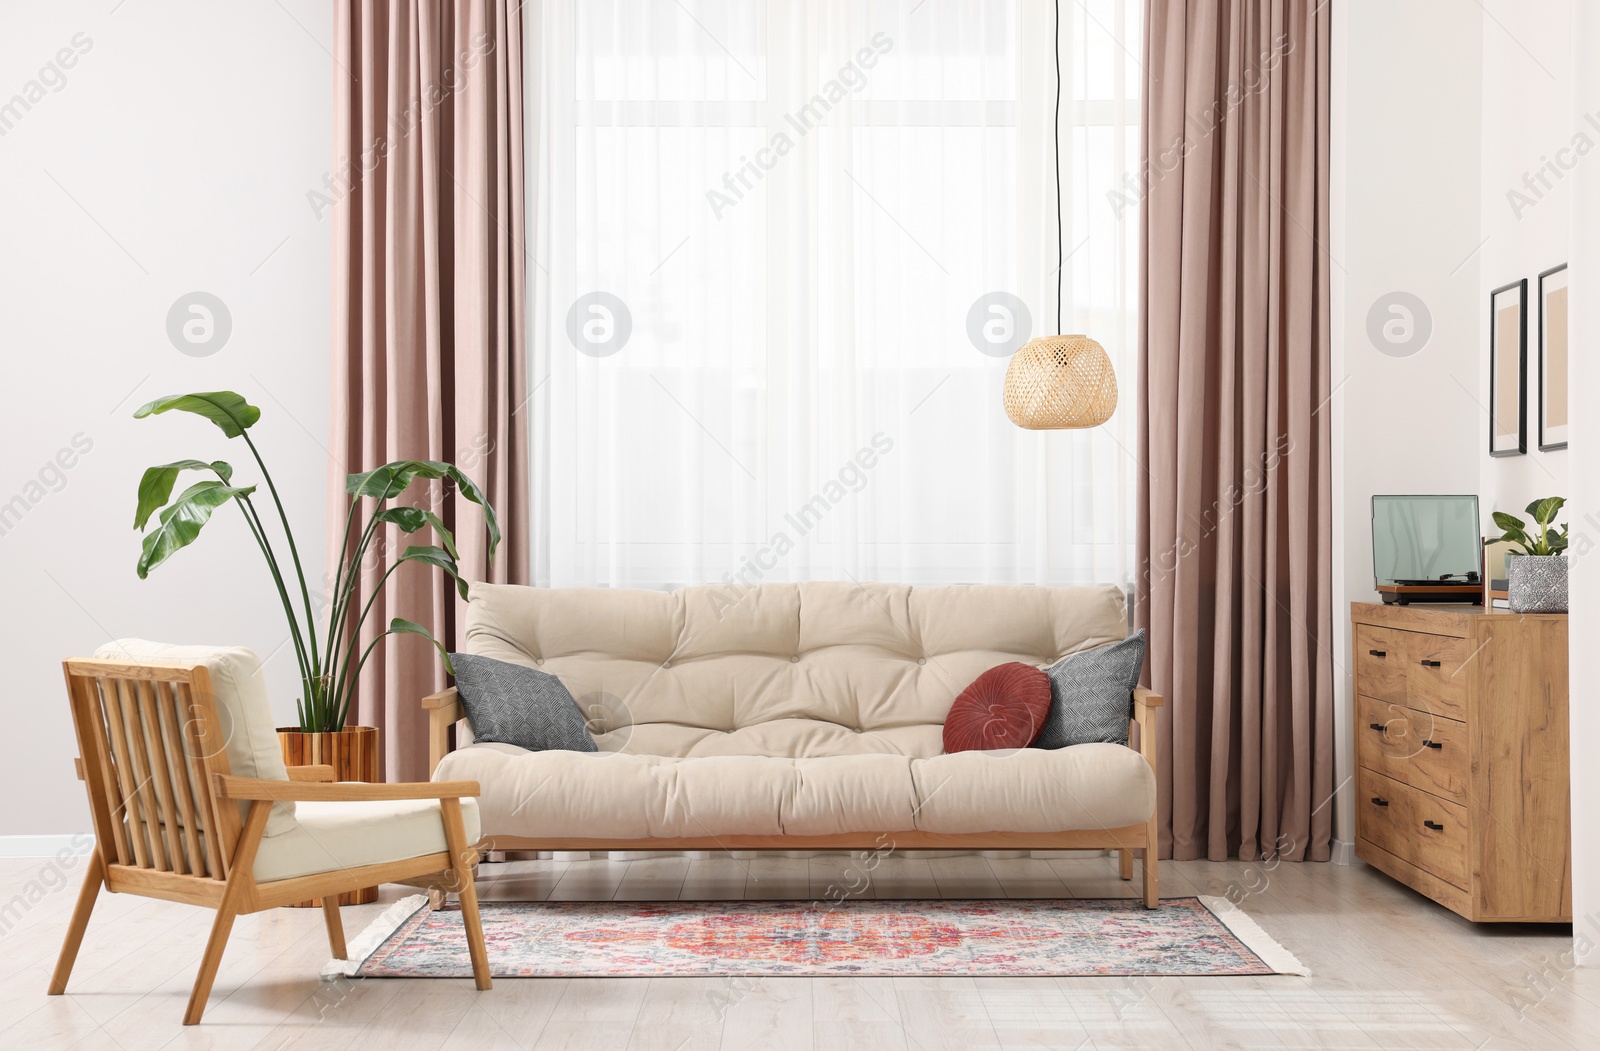 Photo of Beautiful rug, furniture and plant near window indoors